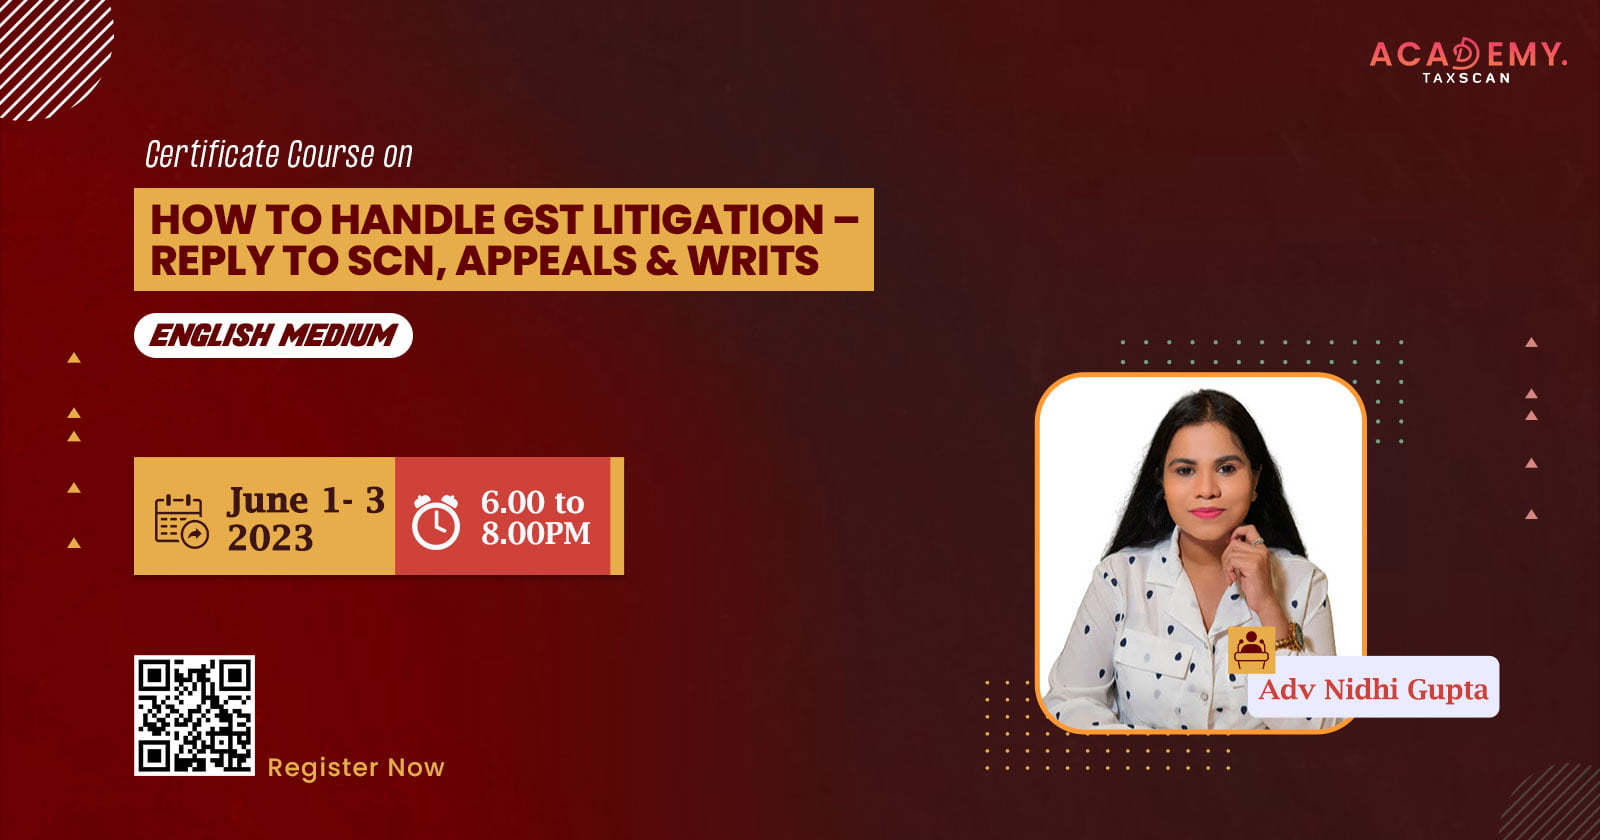 Certificate Course - How To Handle GST Litigation - GST Litigation - GST - Reply to SCN - SCN - Appeals - Writs - Litigation - onlinecertificatecourse - certificatecourse2023 - TaxscanAcademy   - Taxscan